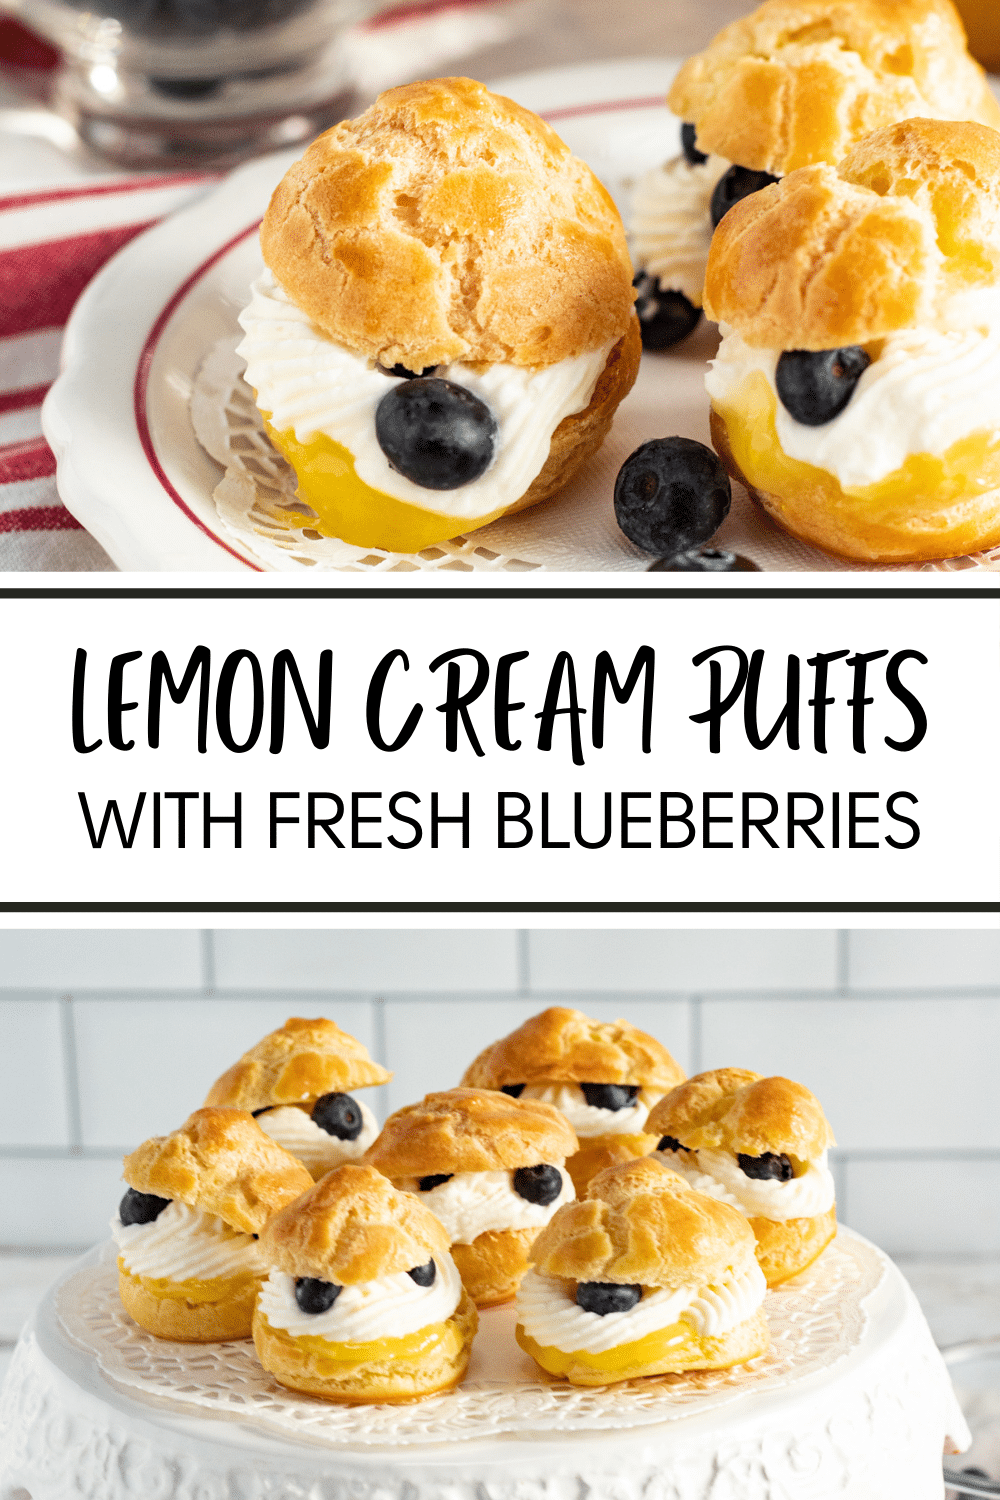 These Lemon Cream Puffs With Fresh Blueberries are light and airy, with a tart and sweet lemon filling and fresh blueberries on top. #lemoncreampuffs #blueberries #creampuffs #dessertrecipe via @wondermomwannab